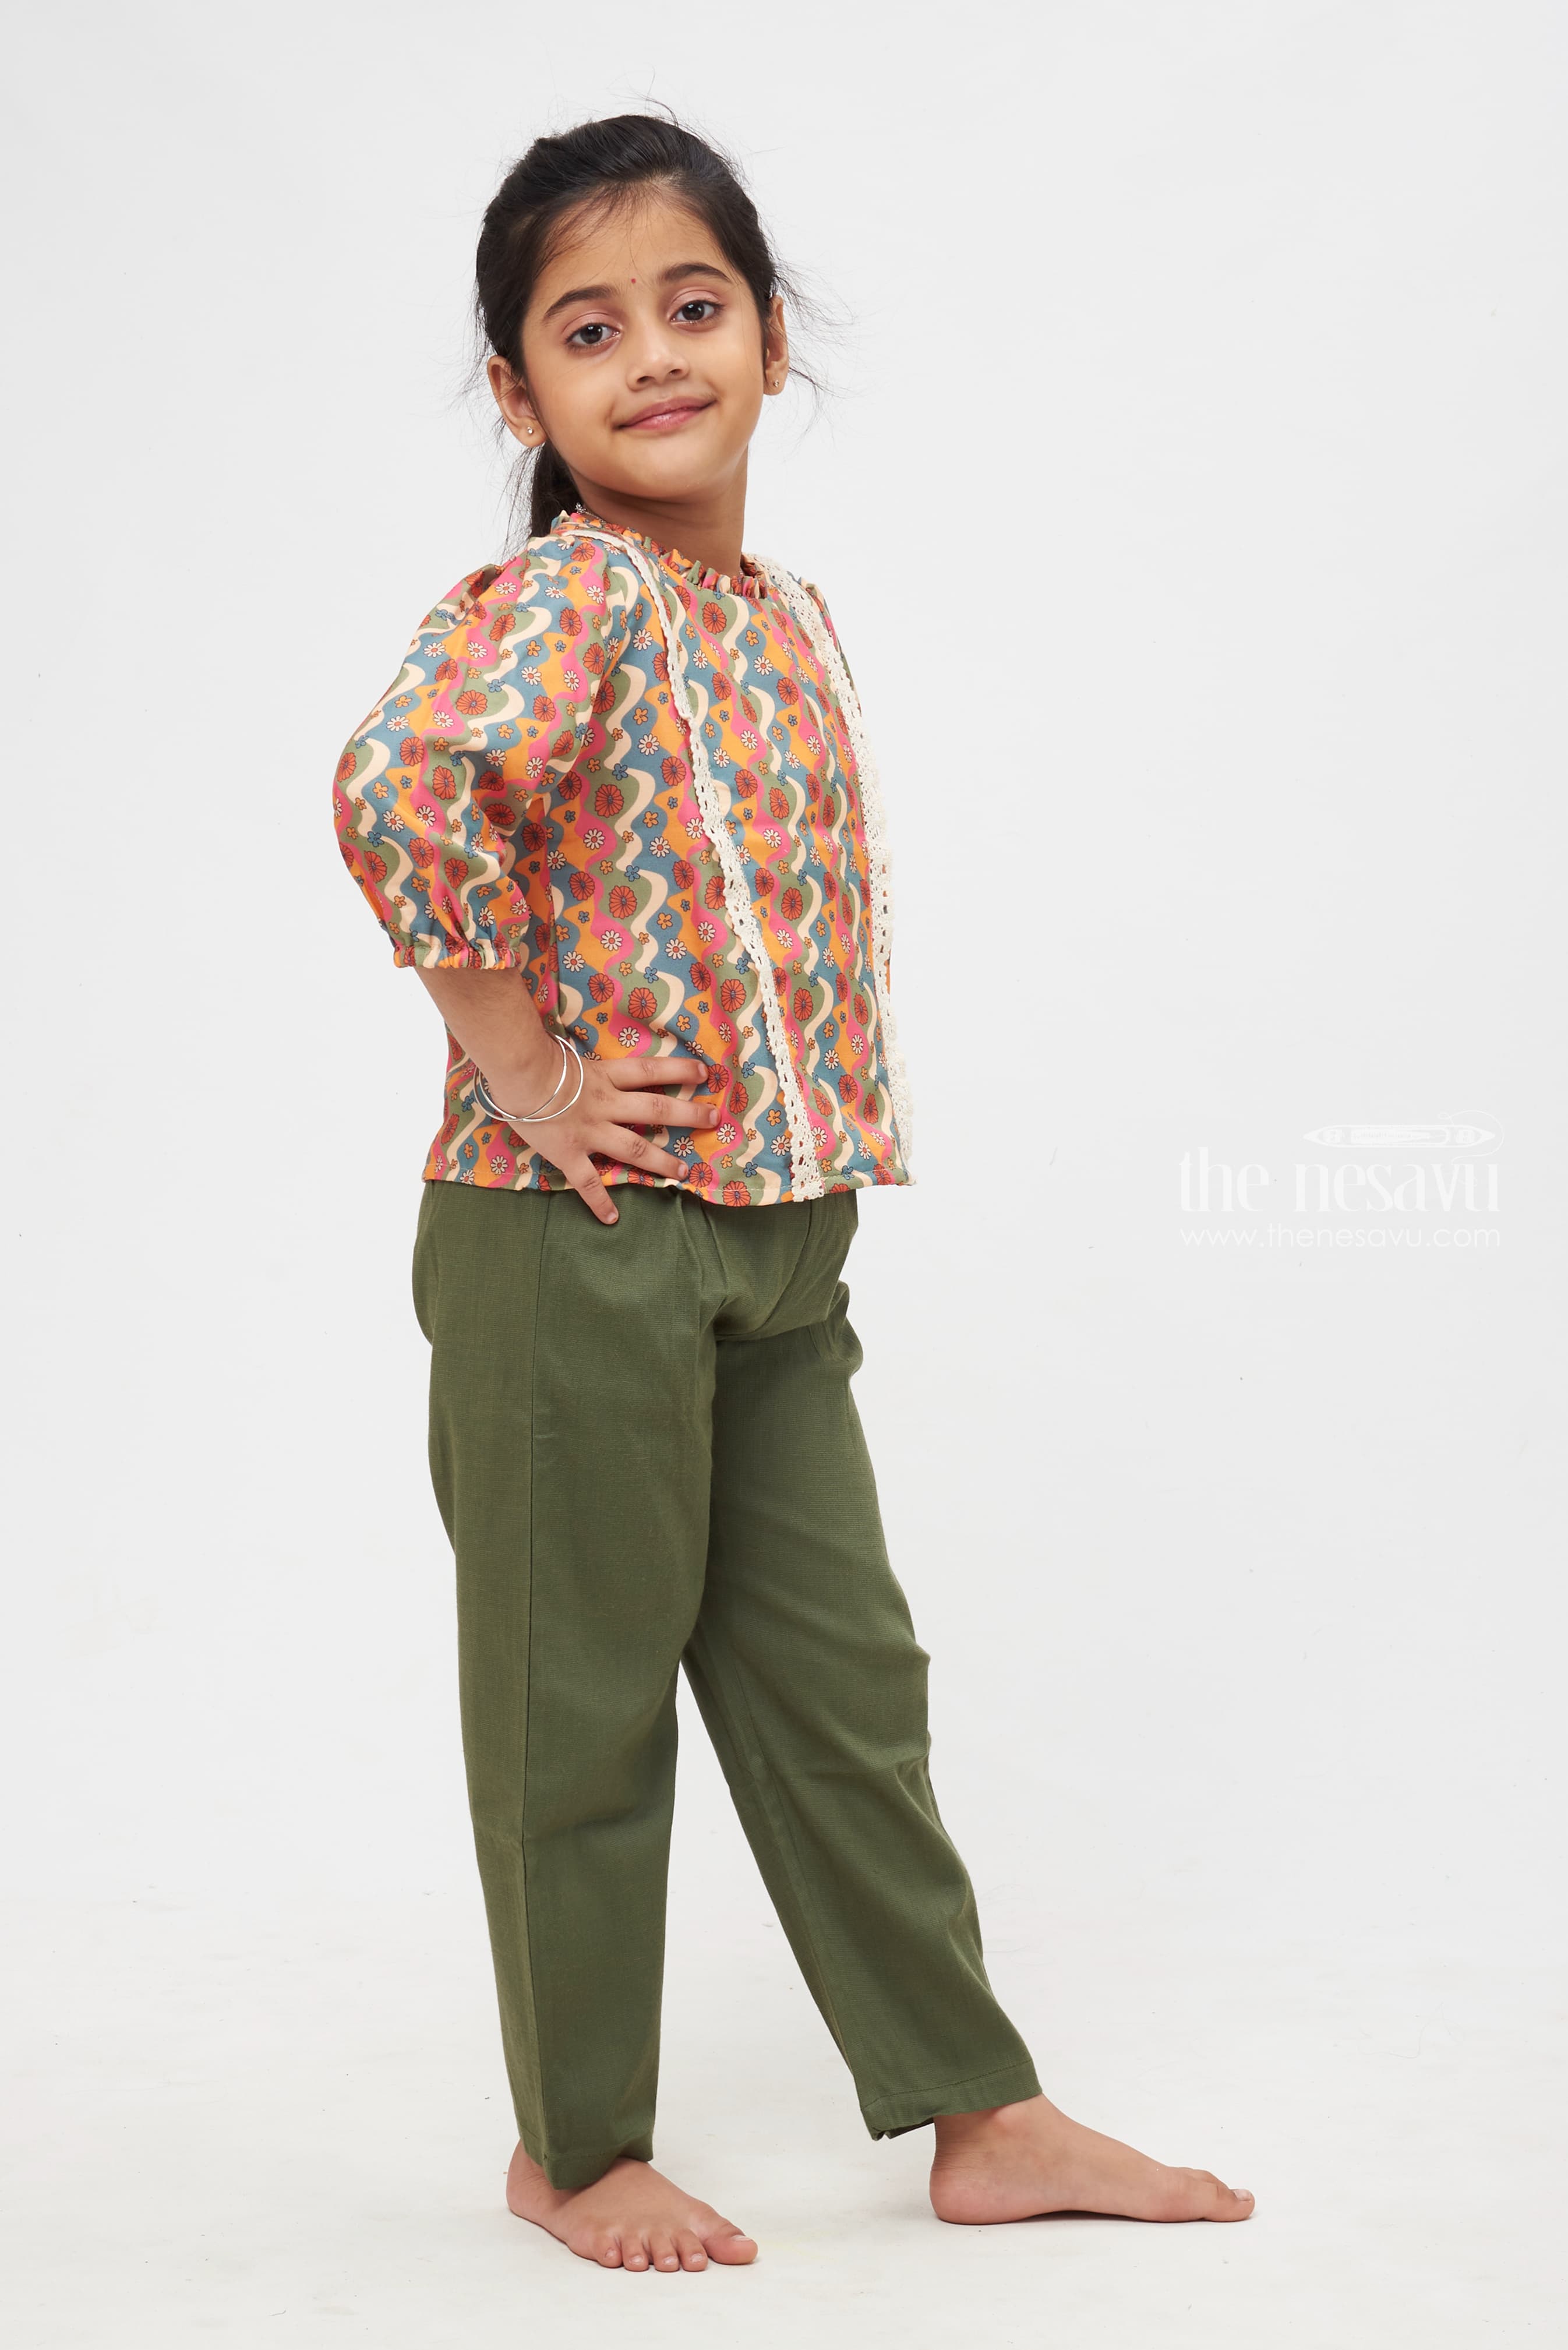 Stylish Girls Boys Cargo Pants For Spring And Autumn Solid Color, Sizes 6  14 210527 From Cong05, $15.17 | DHgate.Com